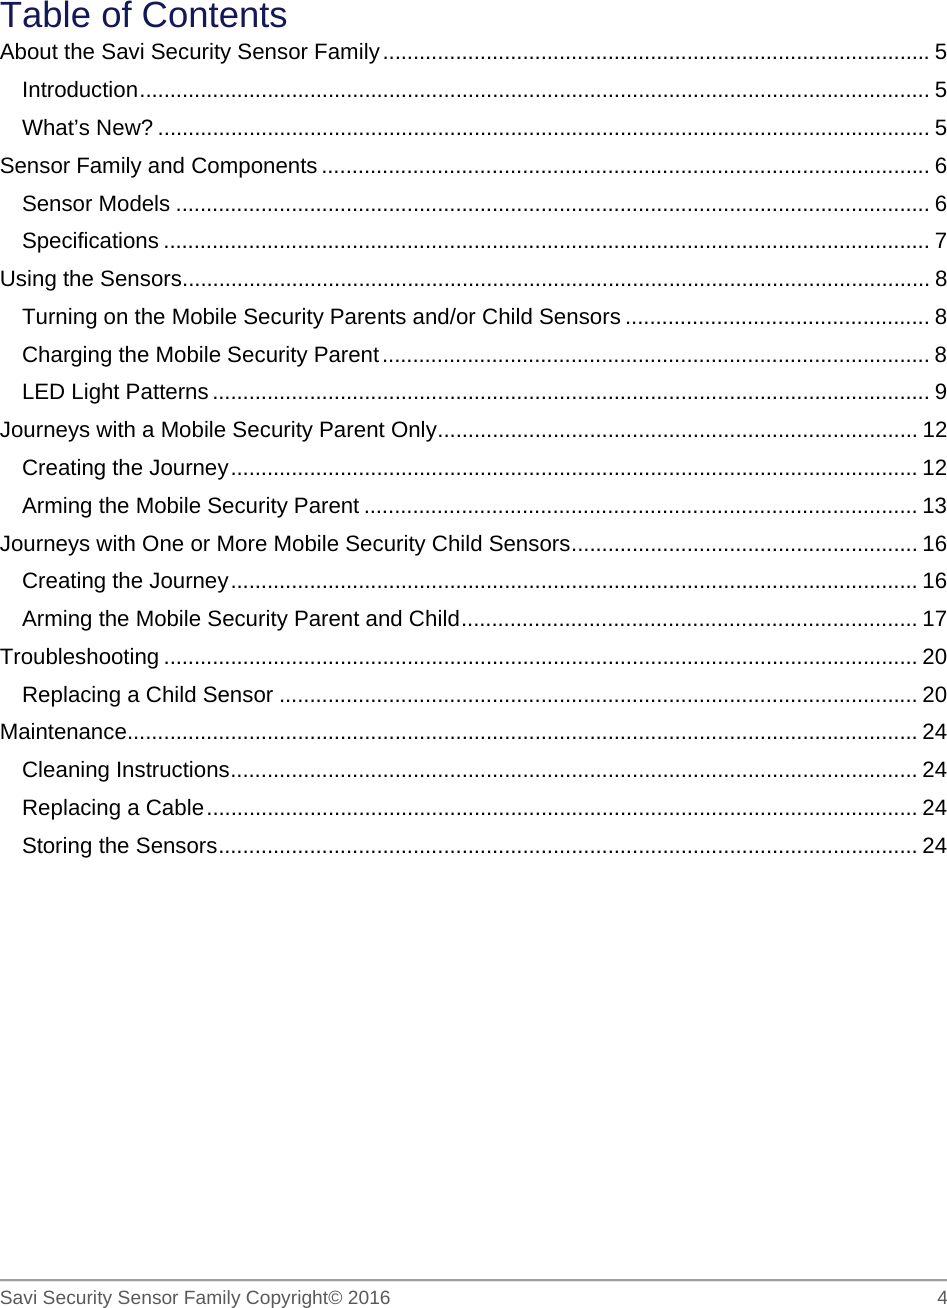   Savi Security Sensor Family Copyright© 2016     4   Table of Contents About the Savi Security Sensor Family .......................................................................................... 5 Introduction  .................................................................................................................................. 5 What’s New? ............................................................................................................................... 5 Sensor Family and Components .................................................................................................... 6 Sensor Models ............................................................................................................................ 6 Specifications .............................................................................................................................. 7 Using the Sensors ........................................................................................................................... 8 Turning on the Mobile Security Parents and/or Child Sensors .................................................. 8 Charging the Mobile Security Parent .......................................................................................... 8 LED Light Patterns ...................................................................................................................... 9 Journeys with a Mobile Security Parent Only ............................................................................... 12 Creating the Journey ................................................................................................................. 12 Arming the Mobile Security Parent ........................................................................................... 13 Journeys with One or More Mobile Security Child Sensors ......................................................... 16 Creating the Journey ................................................................................................................. 16 Arming the Mobile Security Parent and Child ........................................................................... 17 Troubleshooting ............................................................................................................................ 20 Replacing a Child Sensor ......................................................................................................... 20 Maintenance.................................................................................................................................. 24 Cleaning Instructions ................................................................................................................. 24 Replacing a Cable ..................................................................................................................... 24 Storing the Sensors ................................................................................................................... 24  